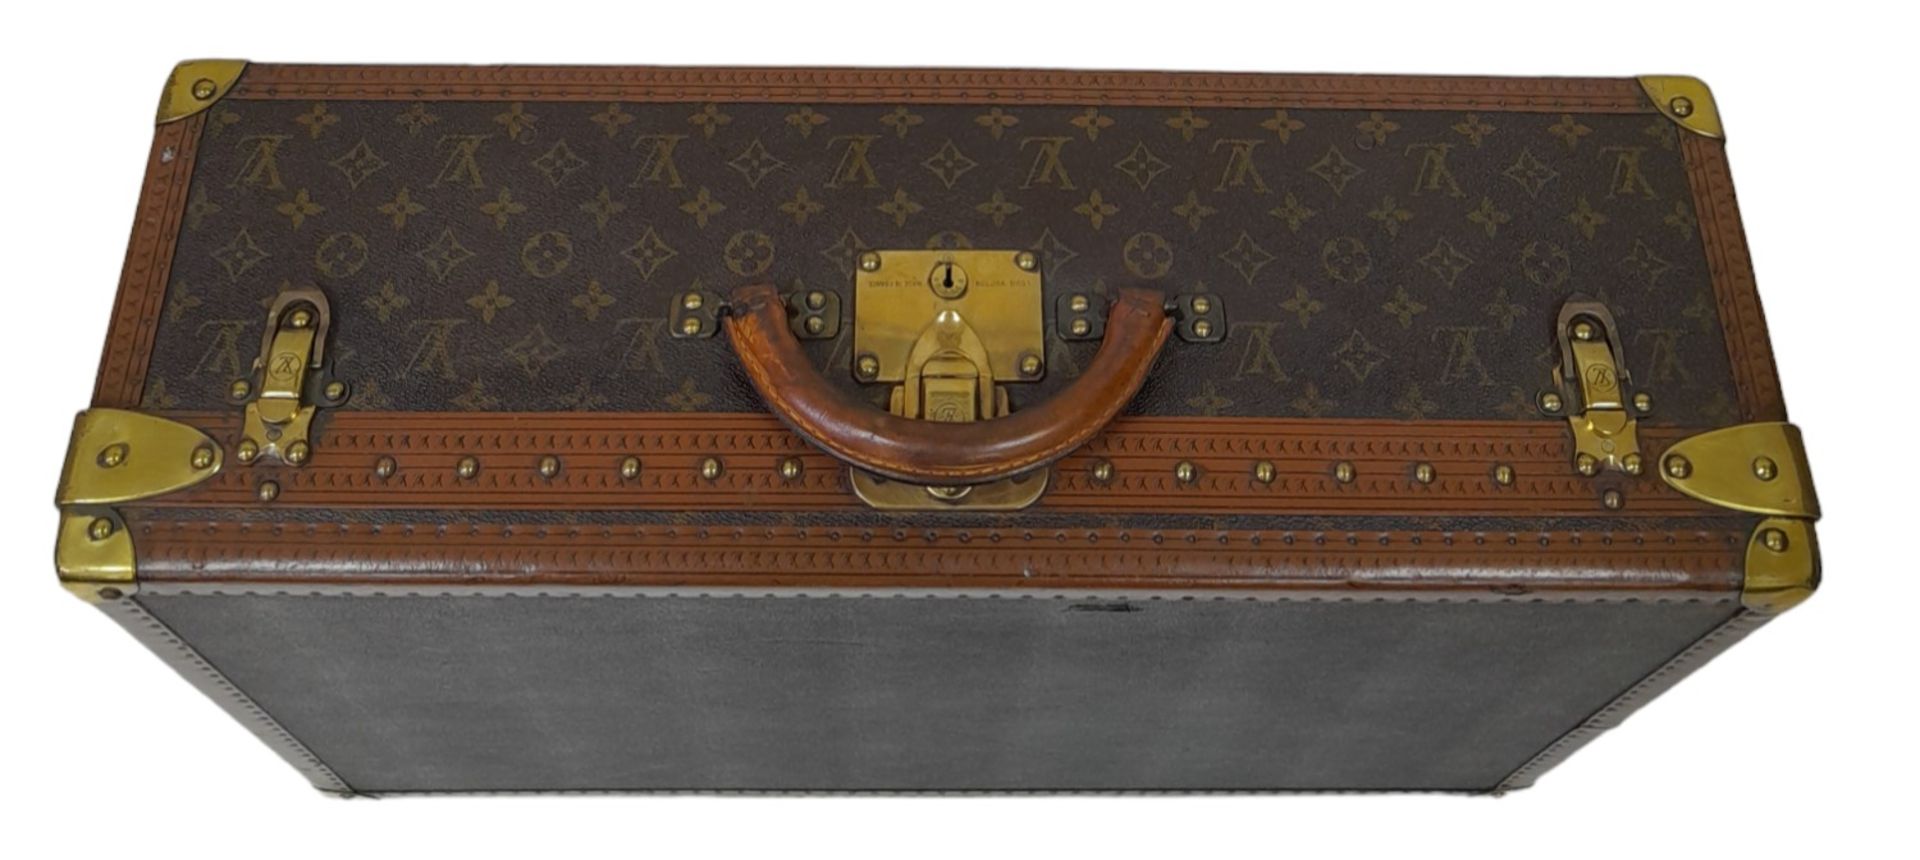 A Vintage Possibly Antique Louis Vuitton Trunk/Hard Suitcase. The smaller brother of Lot 38! - Bild 3 aus 13